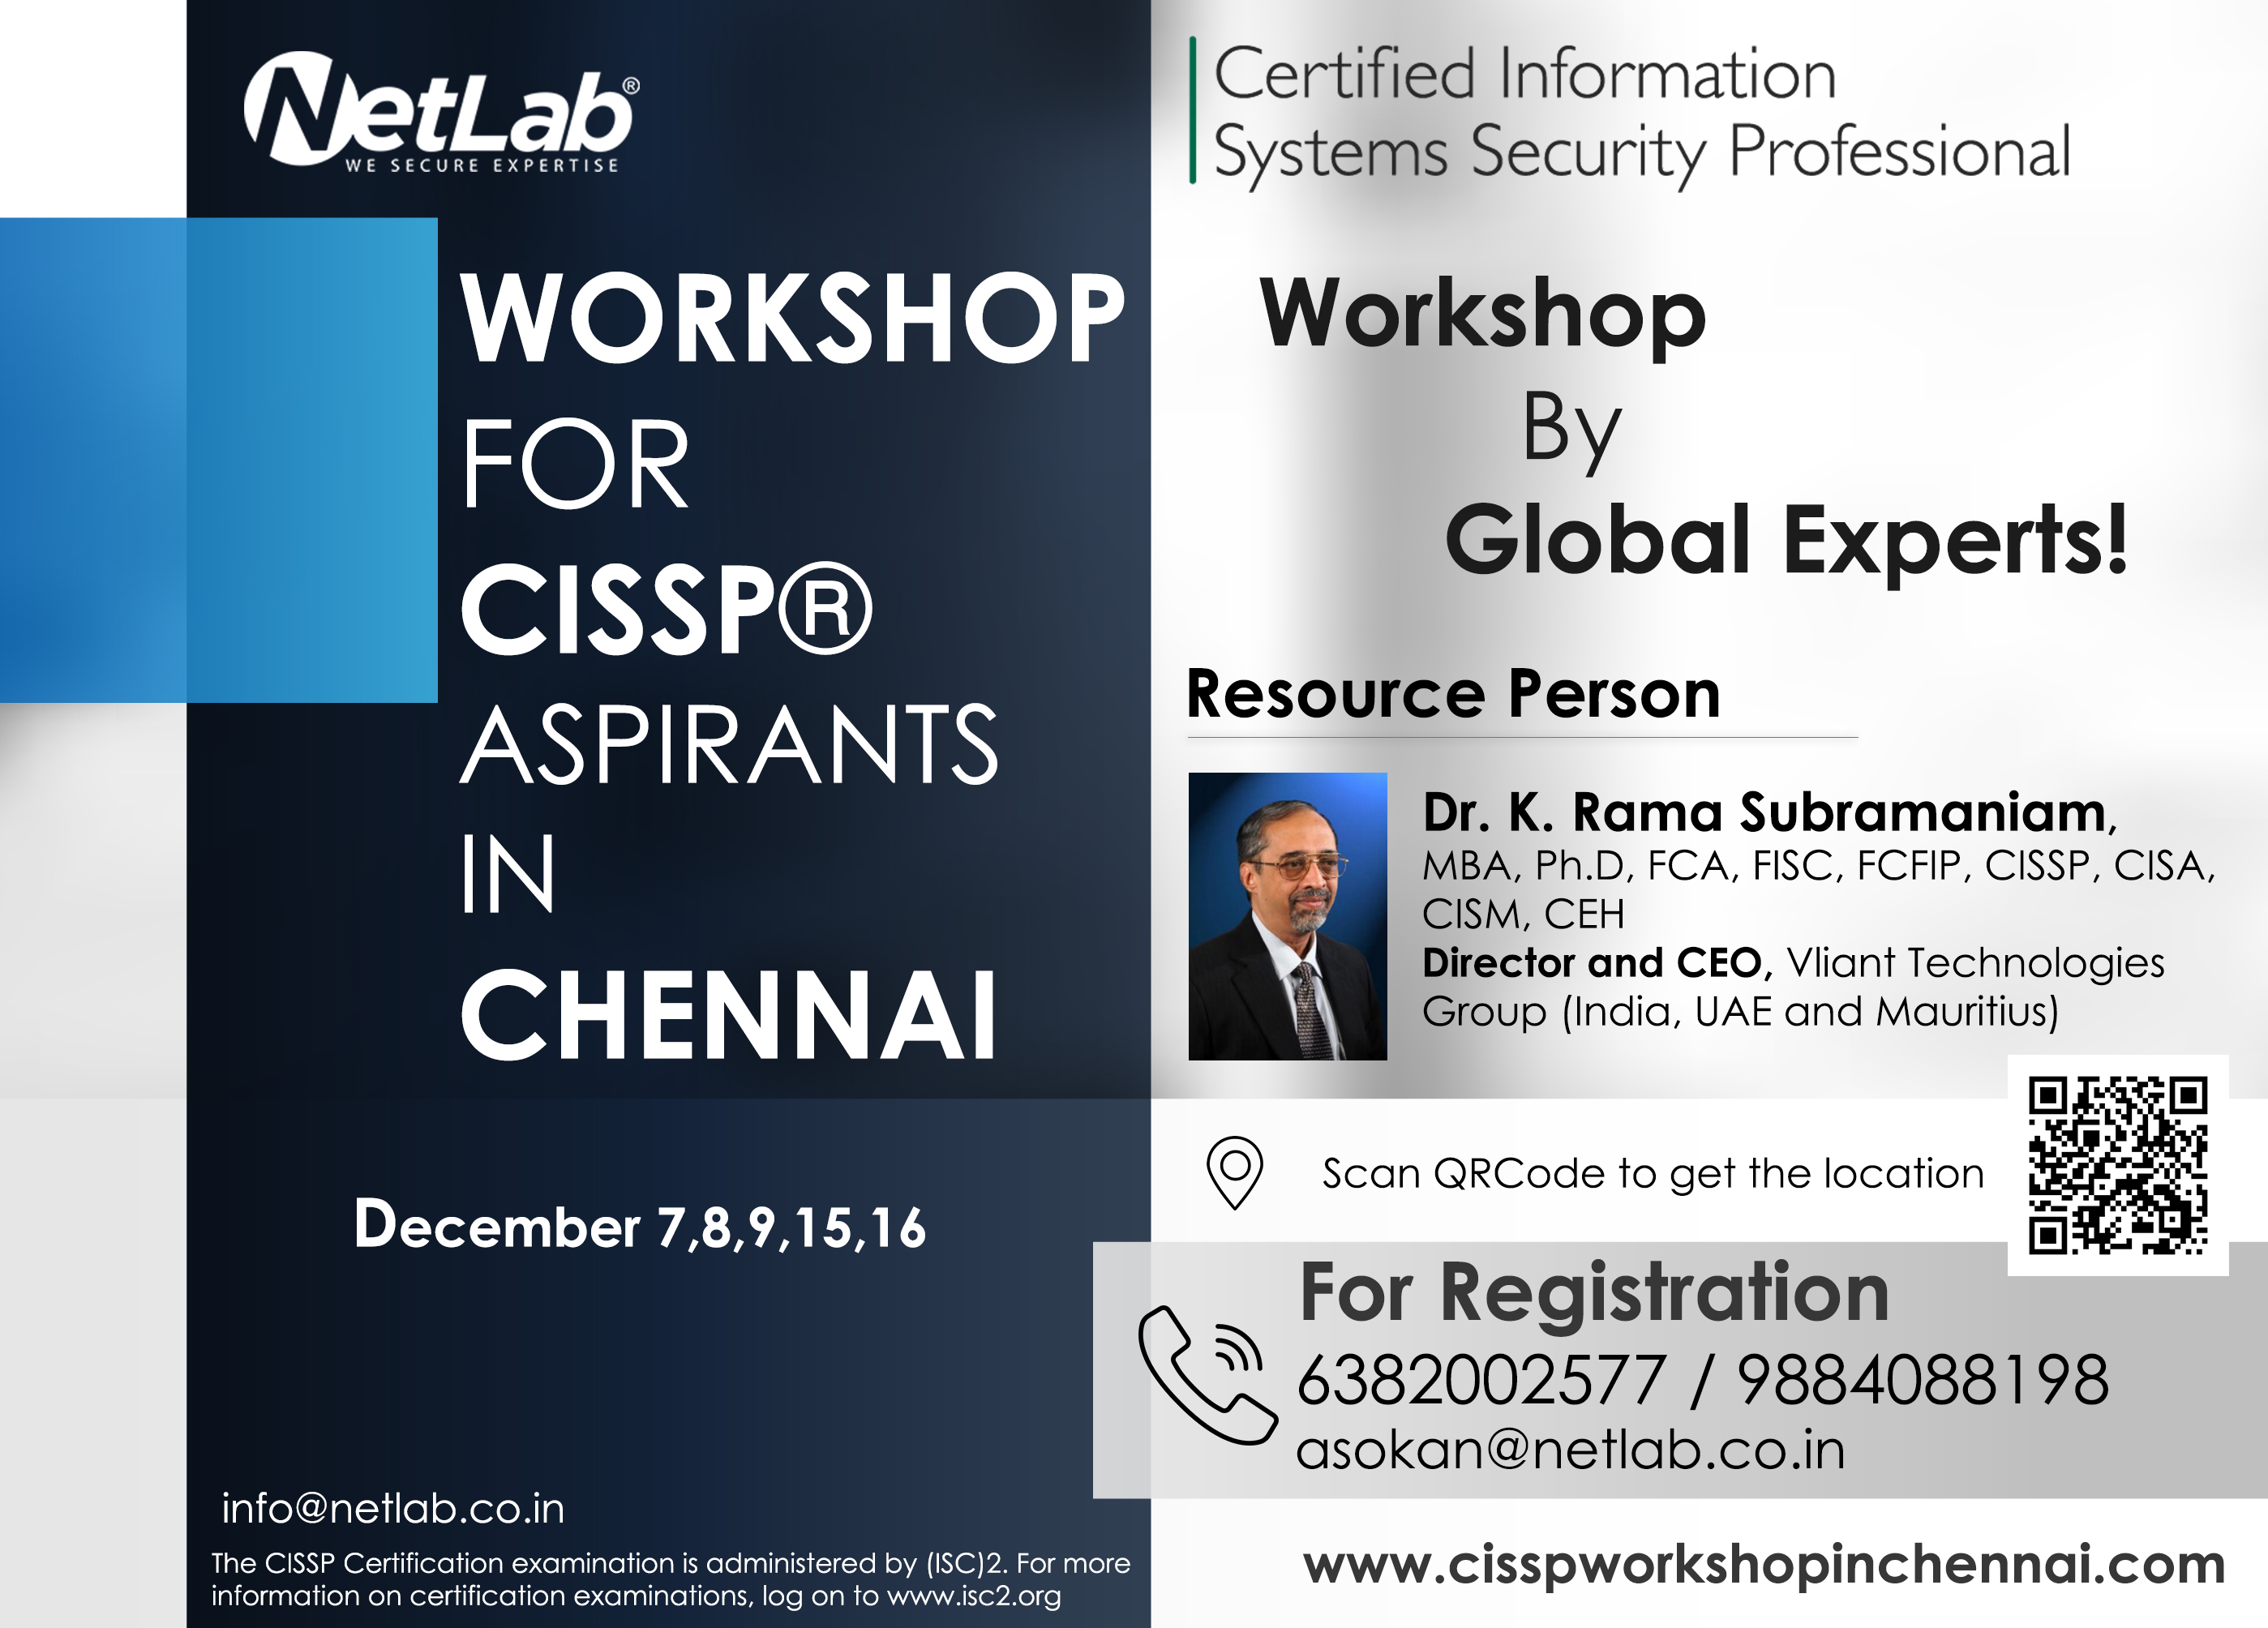 CISSP® (Certified Information Systems Security Professional) Workshop by Global Experts, Chennai, Tamil Nadu, India